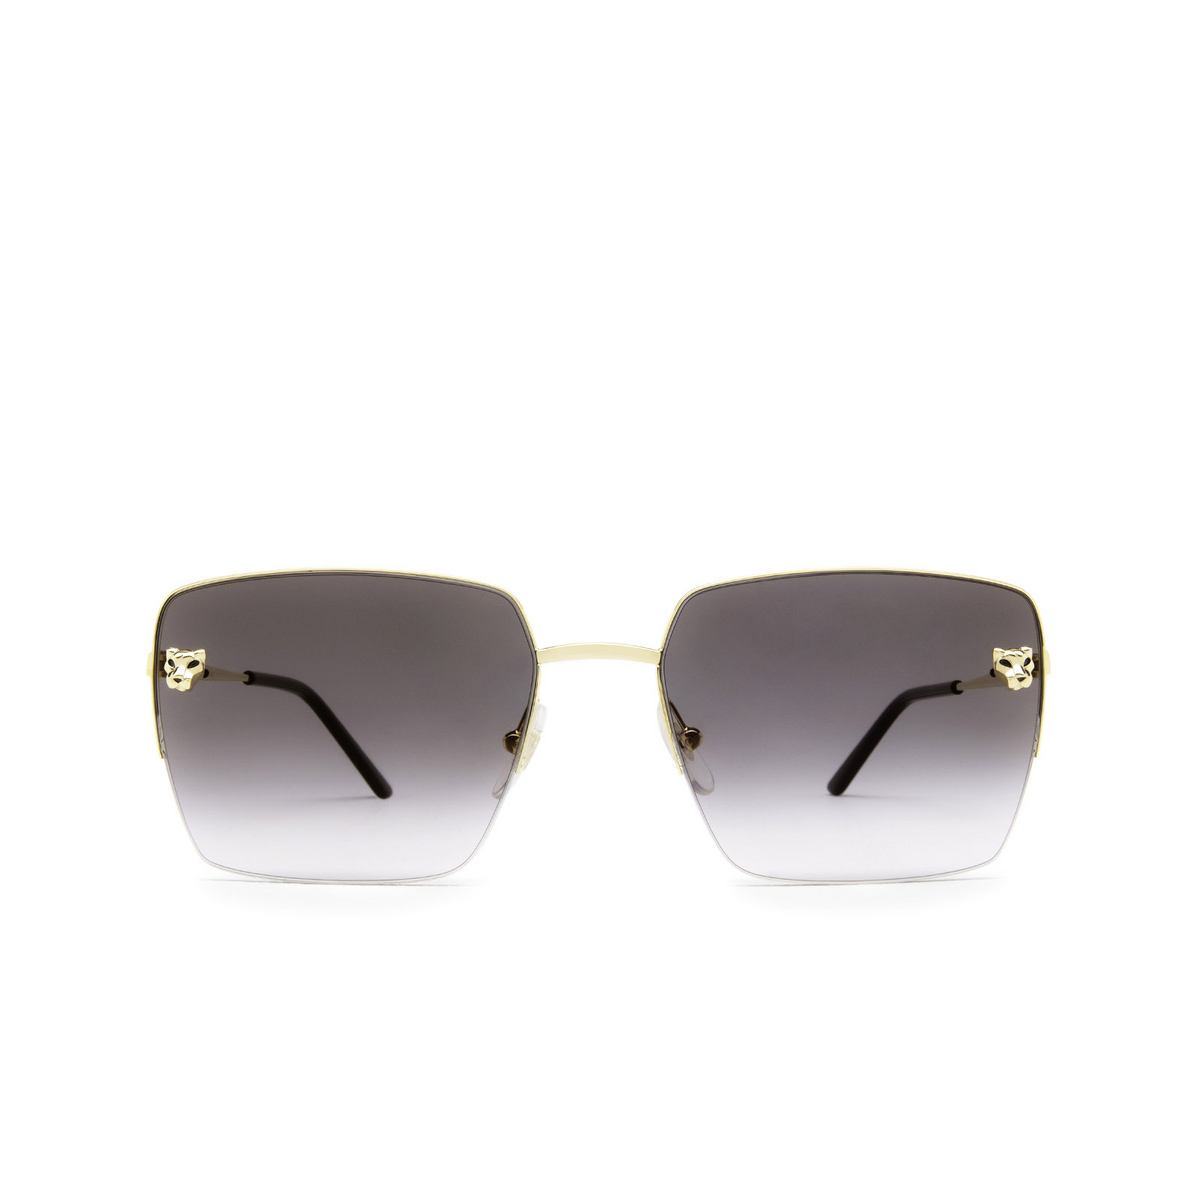 Cartier® Rectangle Sunglasses: CT0333S color Gold 001 - front view.